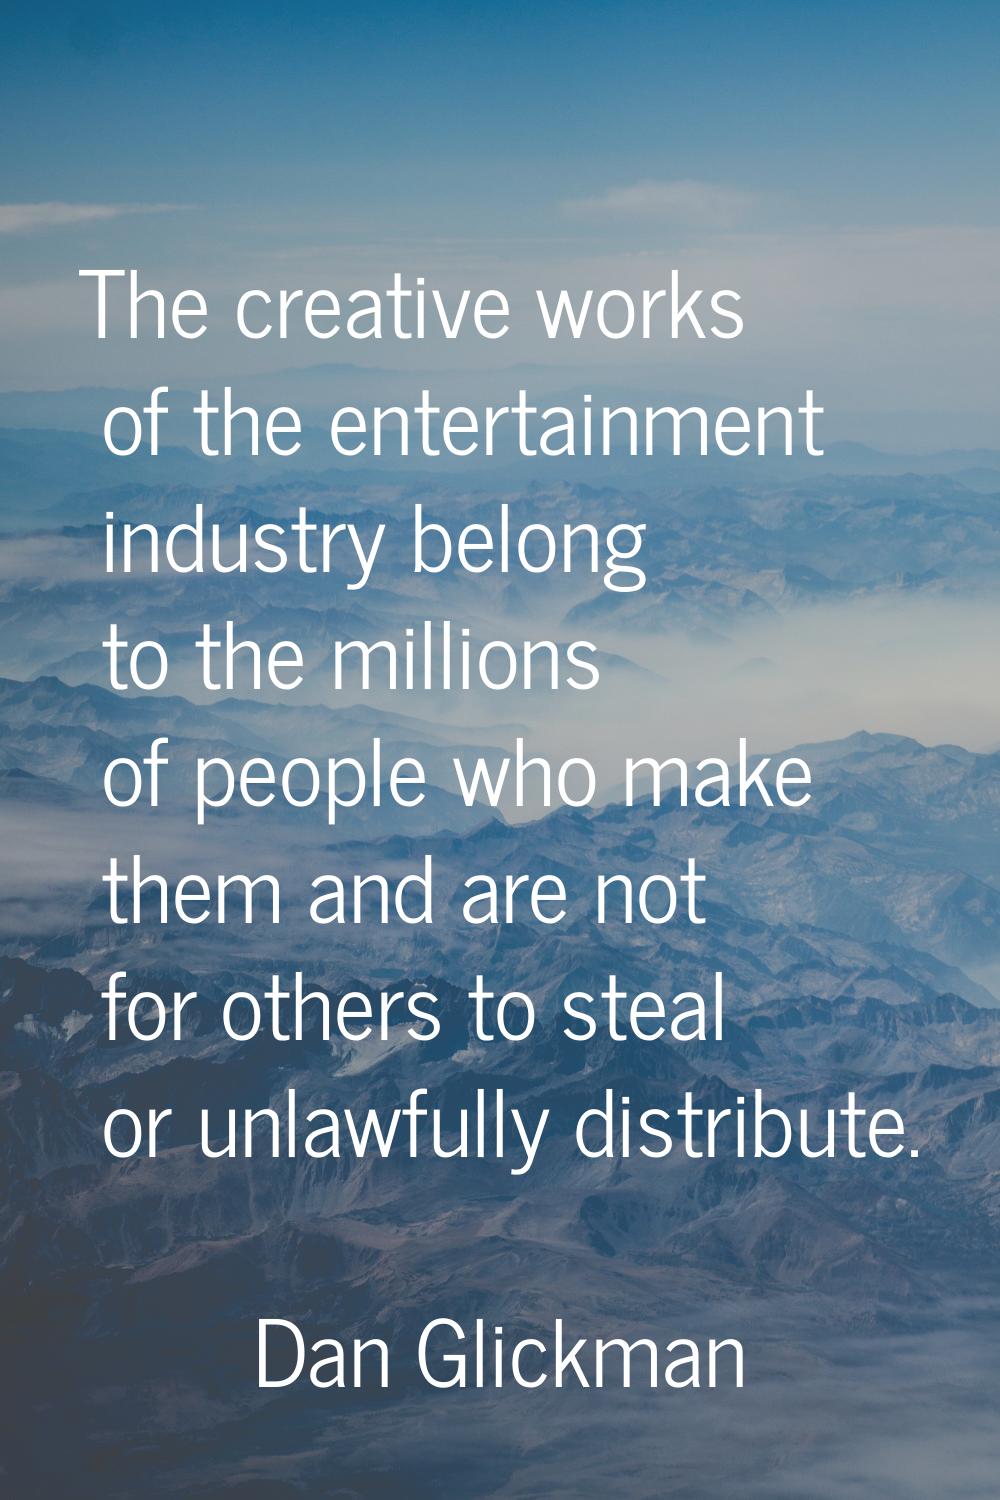 The creative works of the entertainment industry belong to the millions of people who make them and